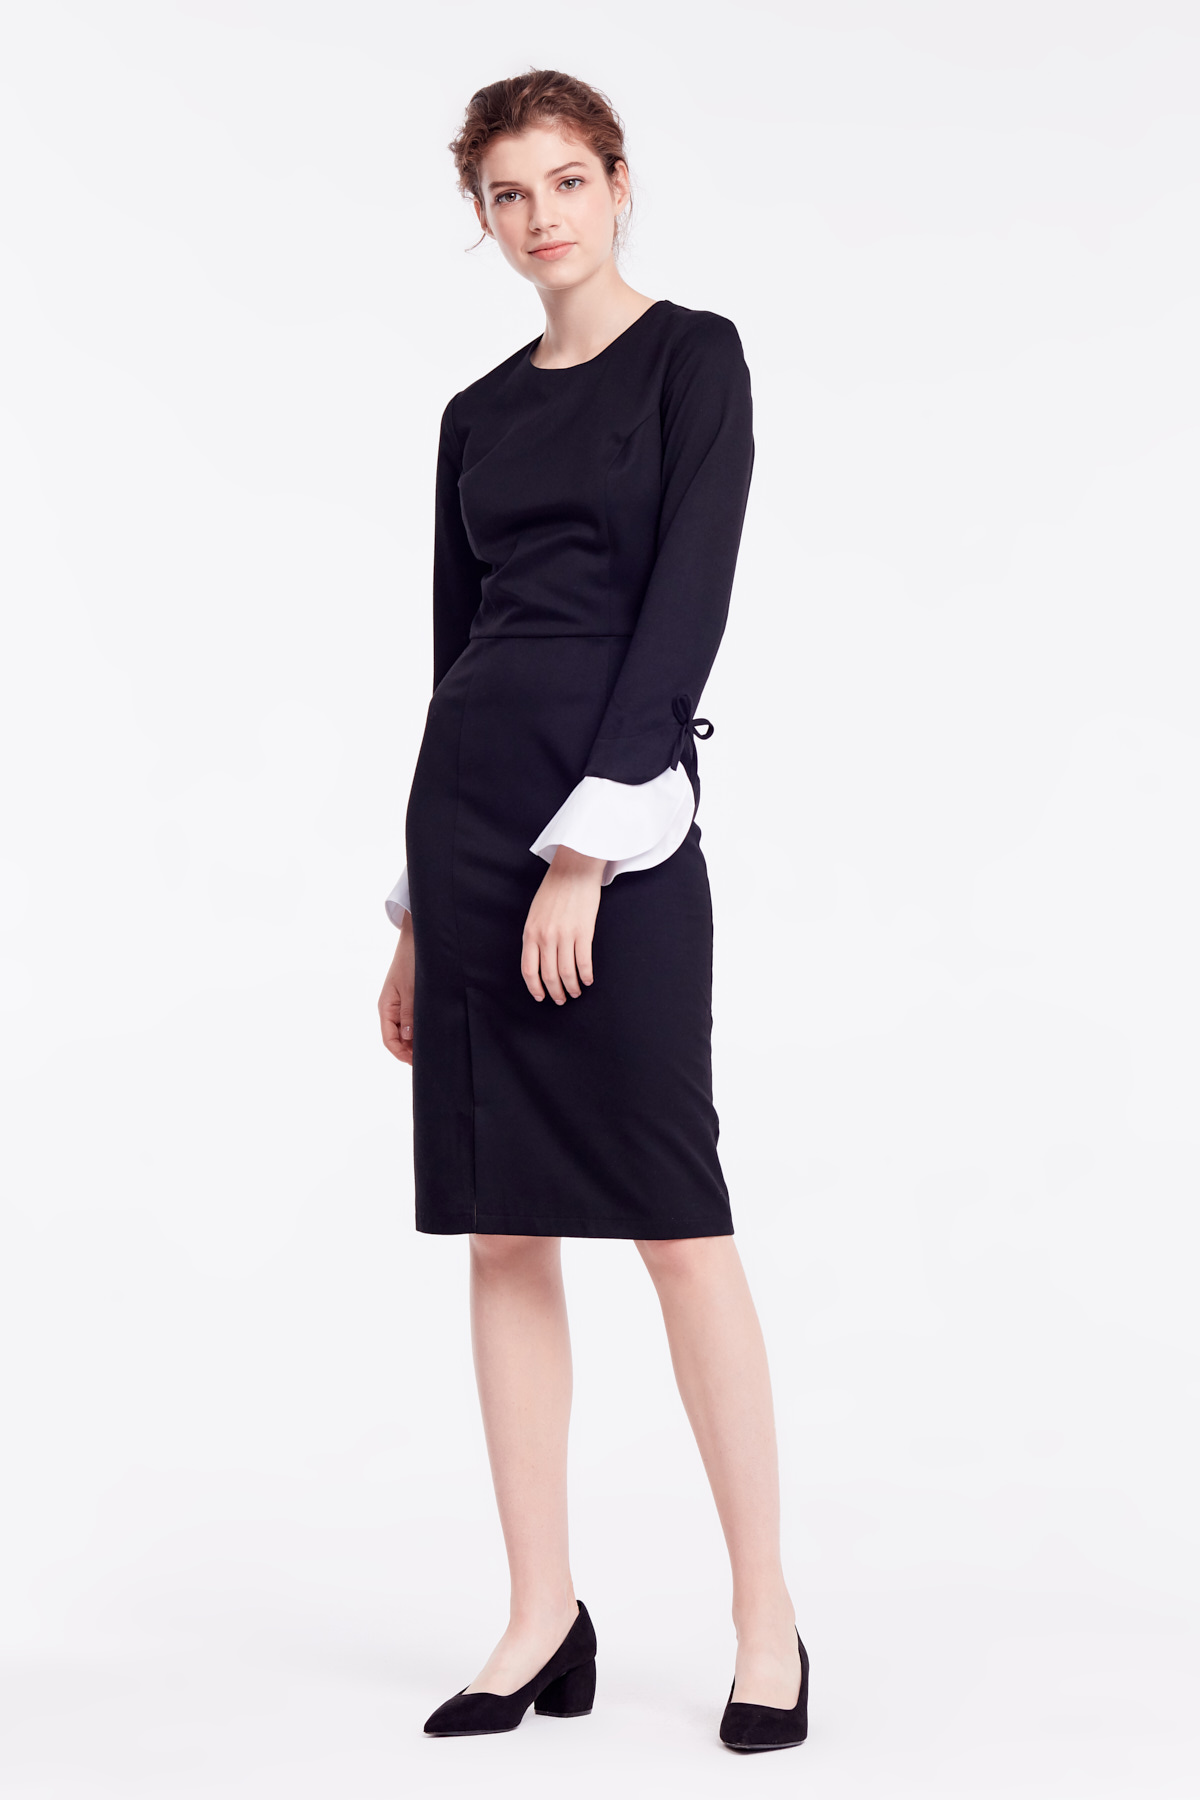 Black column dress with white cuffs on sleeves, photo 2